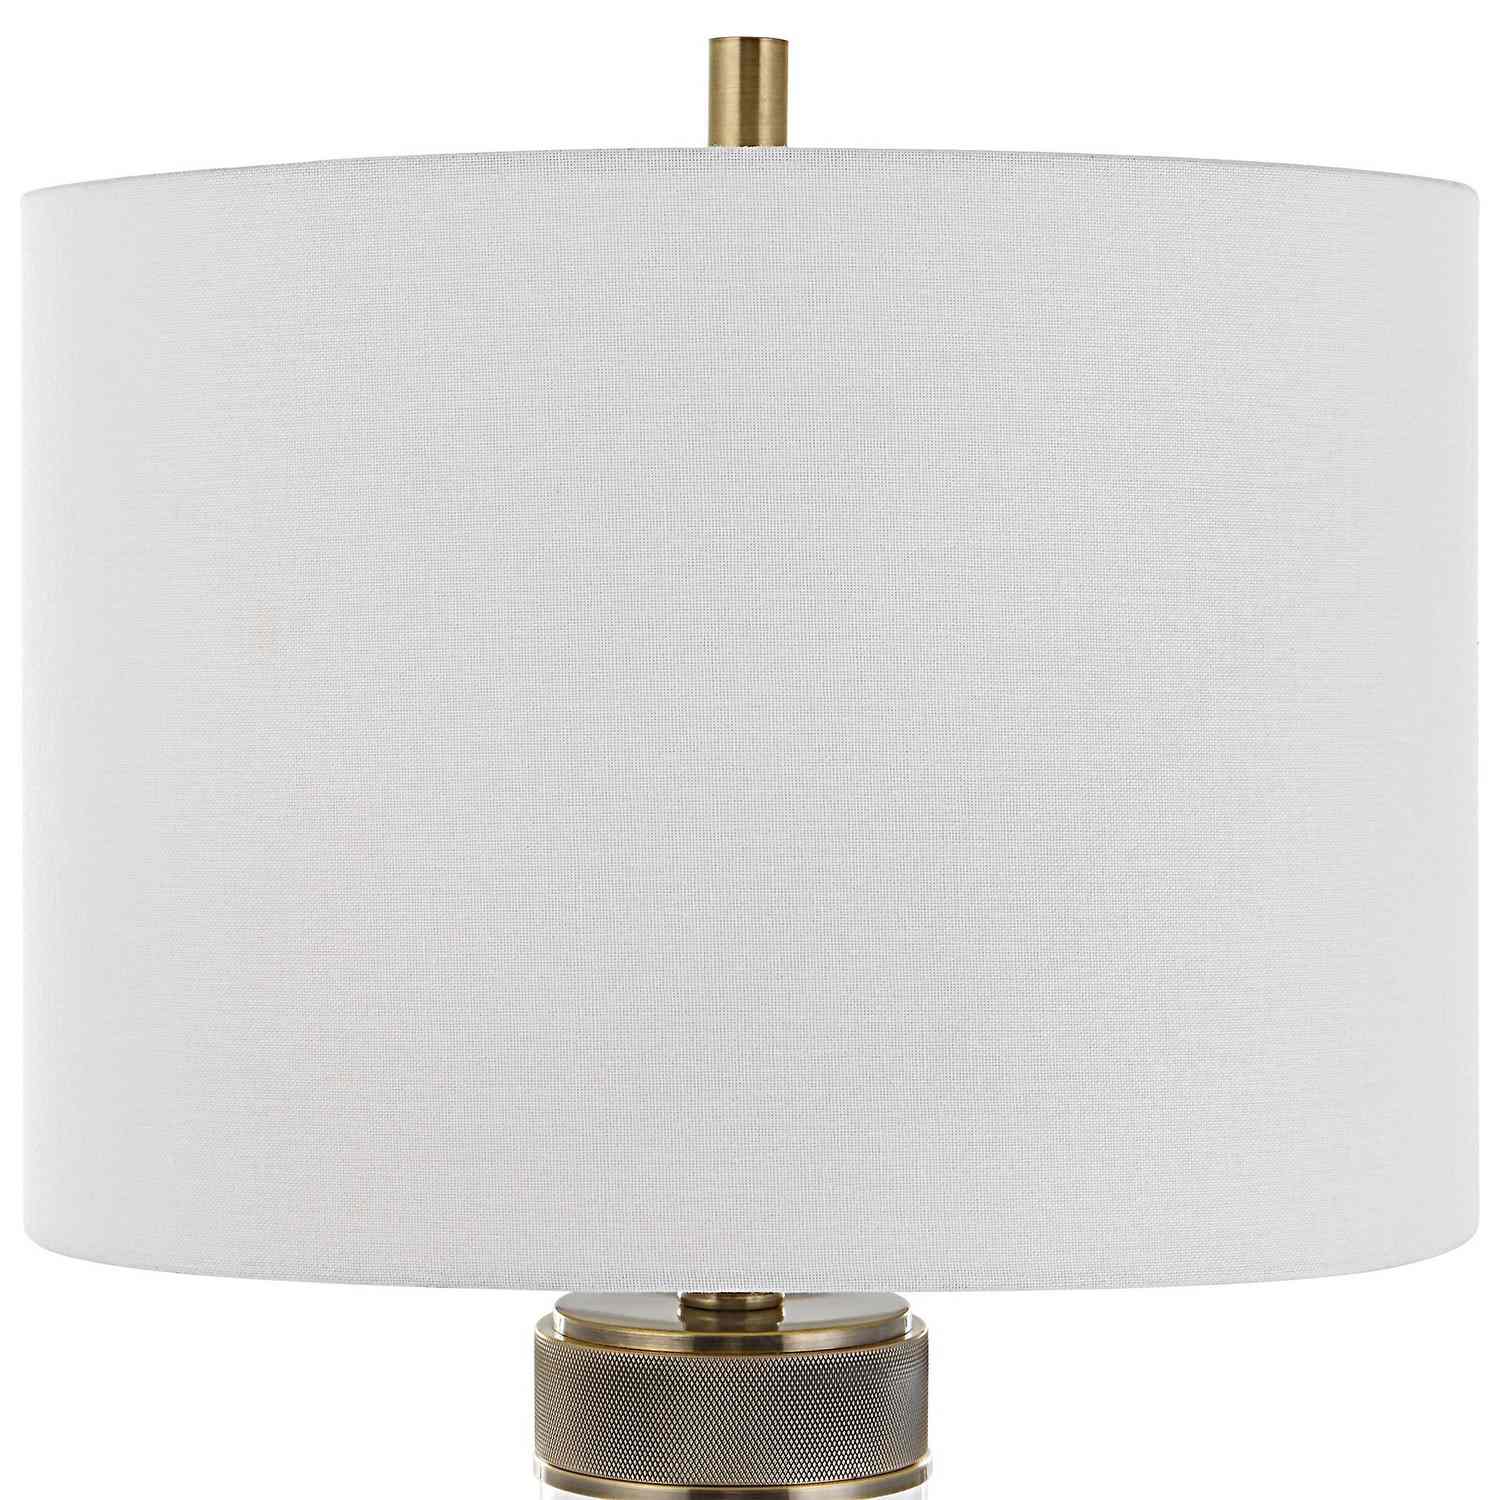 Uttermost W26087-1 Table Lamp - Antique Brass